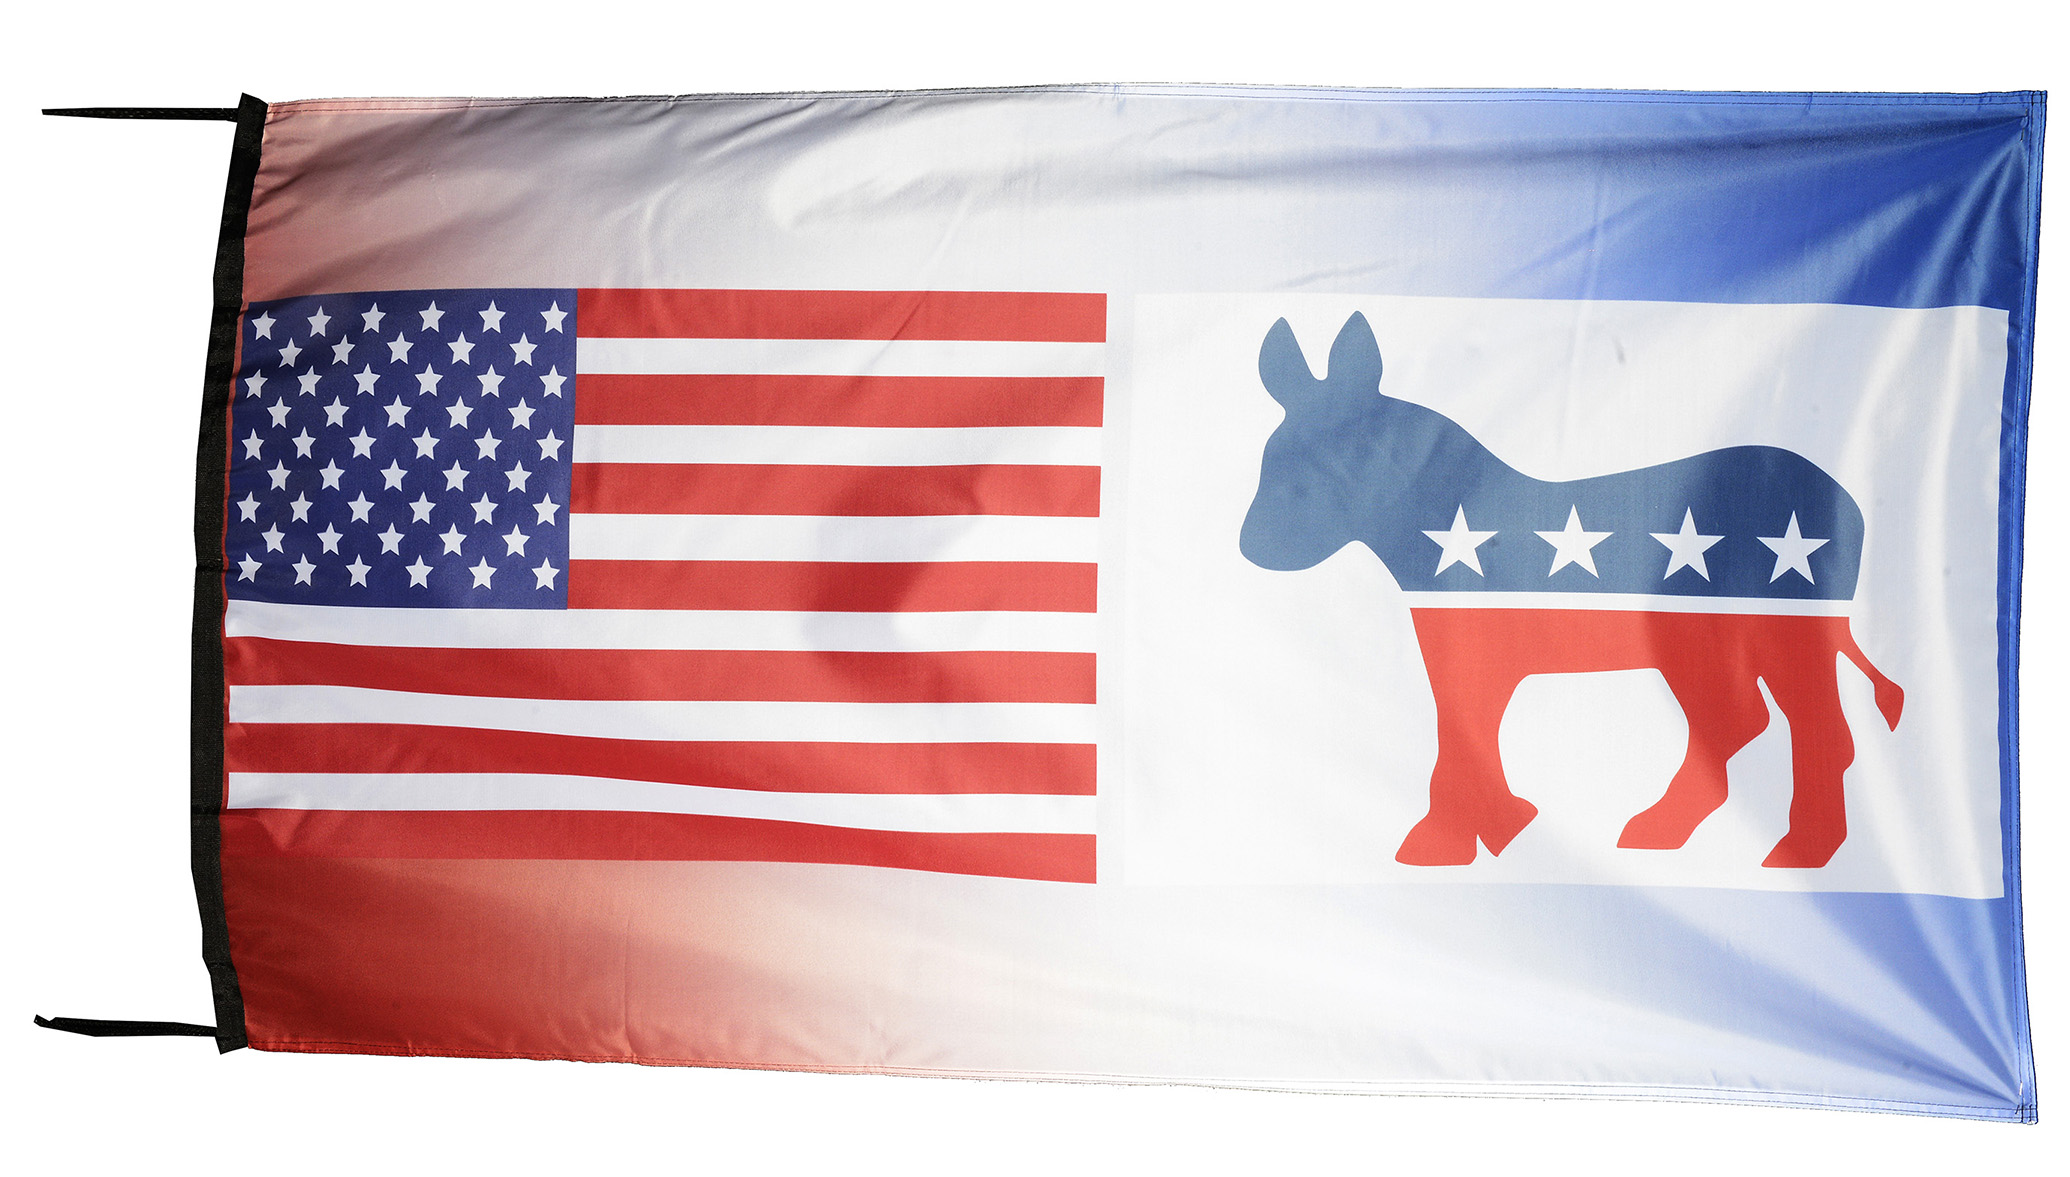 Flag  078 USA / US Country / United States Of America and Republicans Party / Senators / Congress / Washington / White House / Capitol / Politics / Presidential / Elections / Washington / Pride Hybrid Weather-Resistant Polyester Outdoor Flag Landscape Banner / Vivid Colors / 3 X 5 FT (150 x 90cm) International Flags for Sale